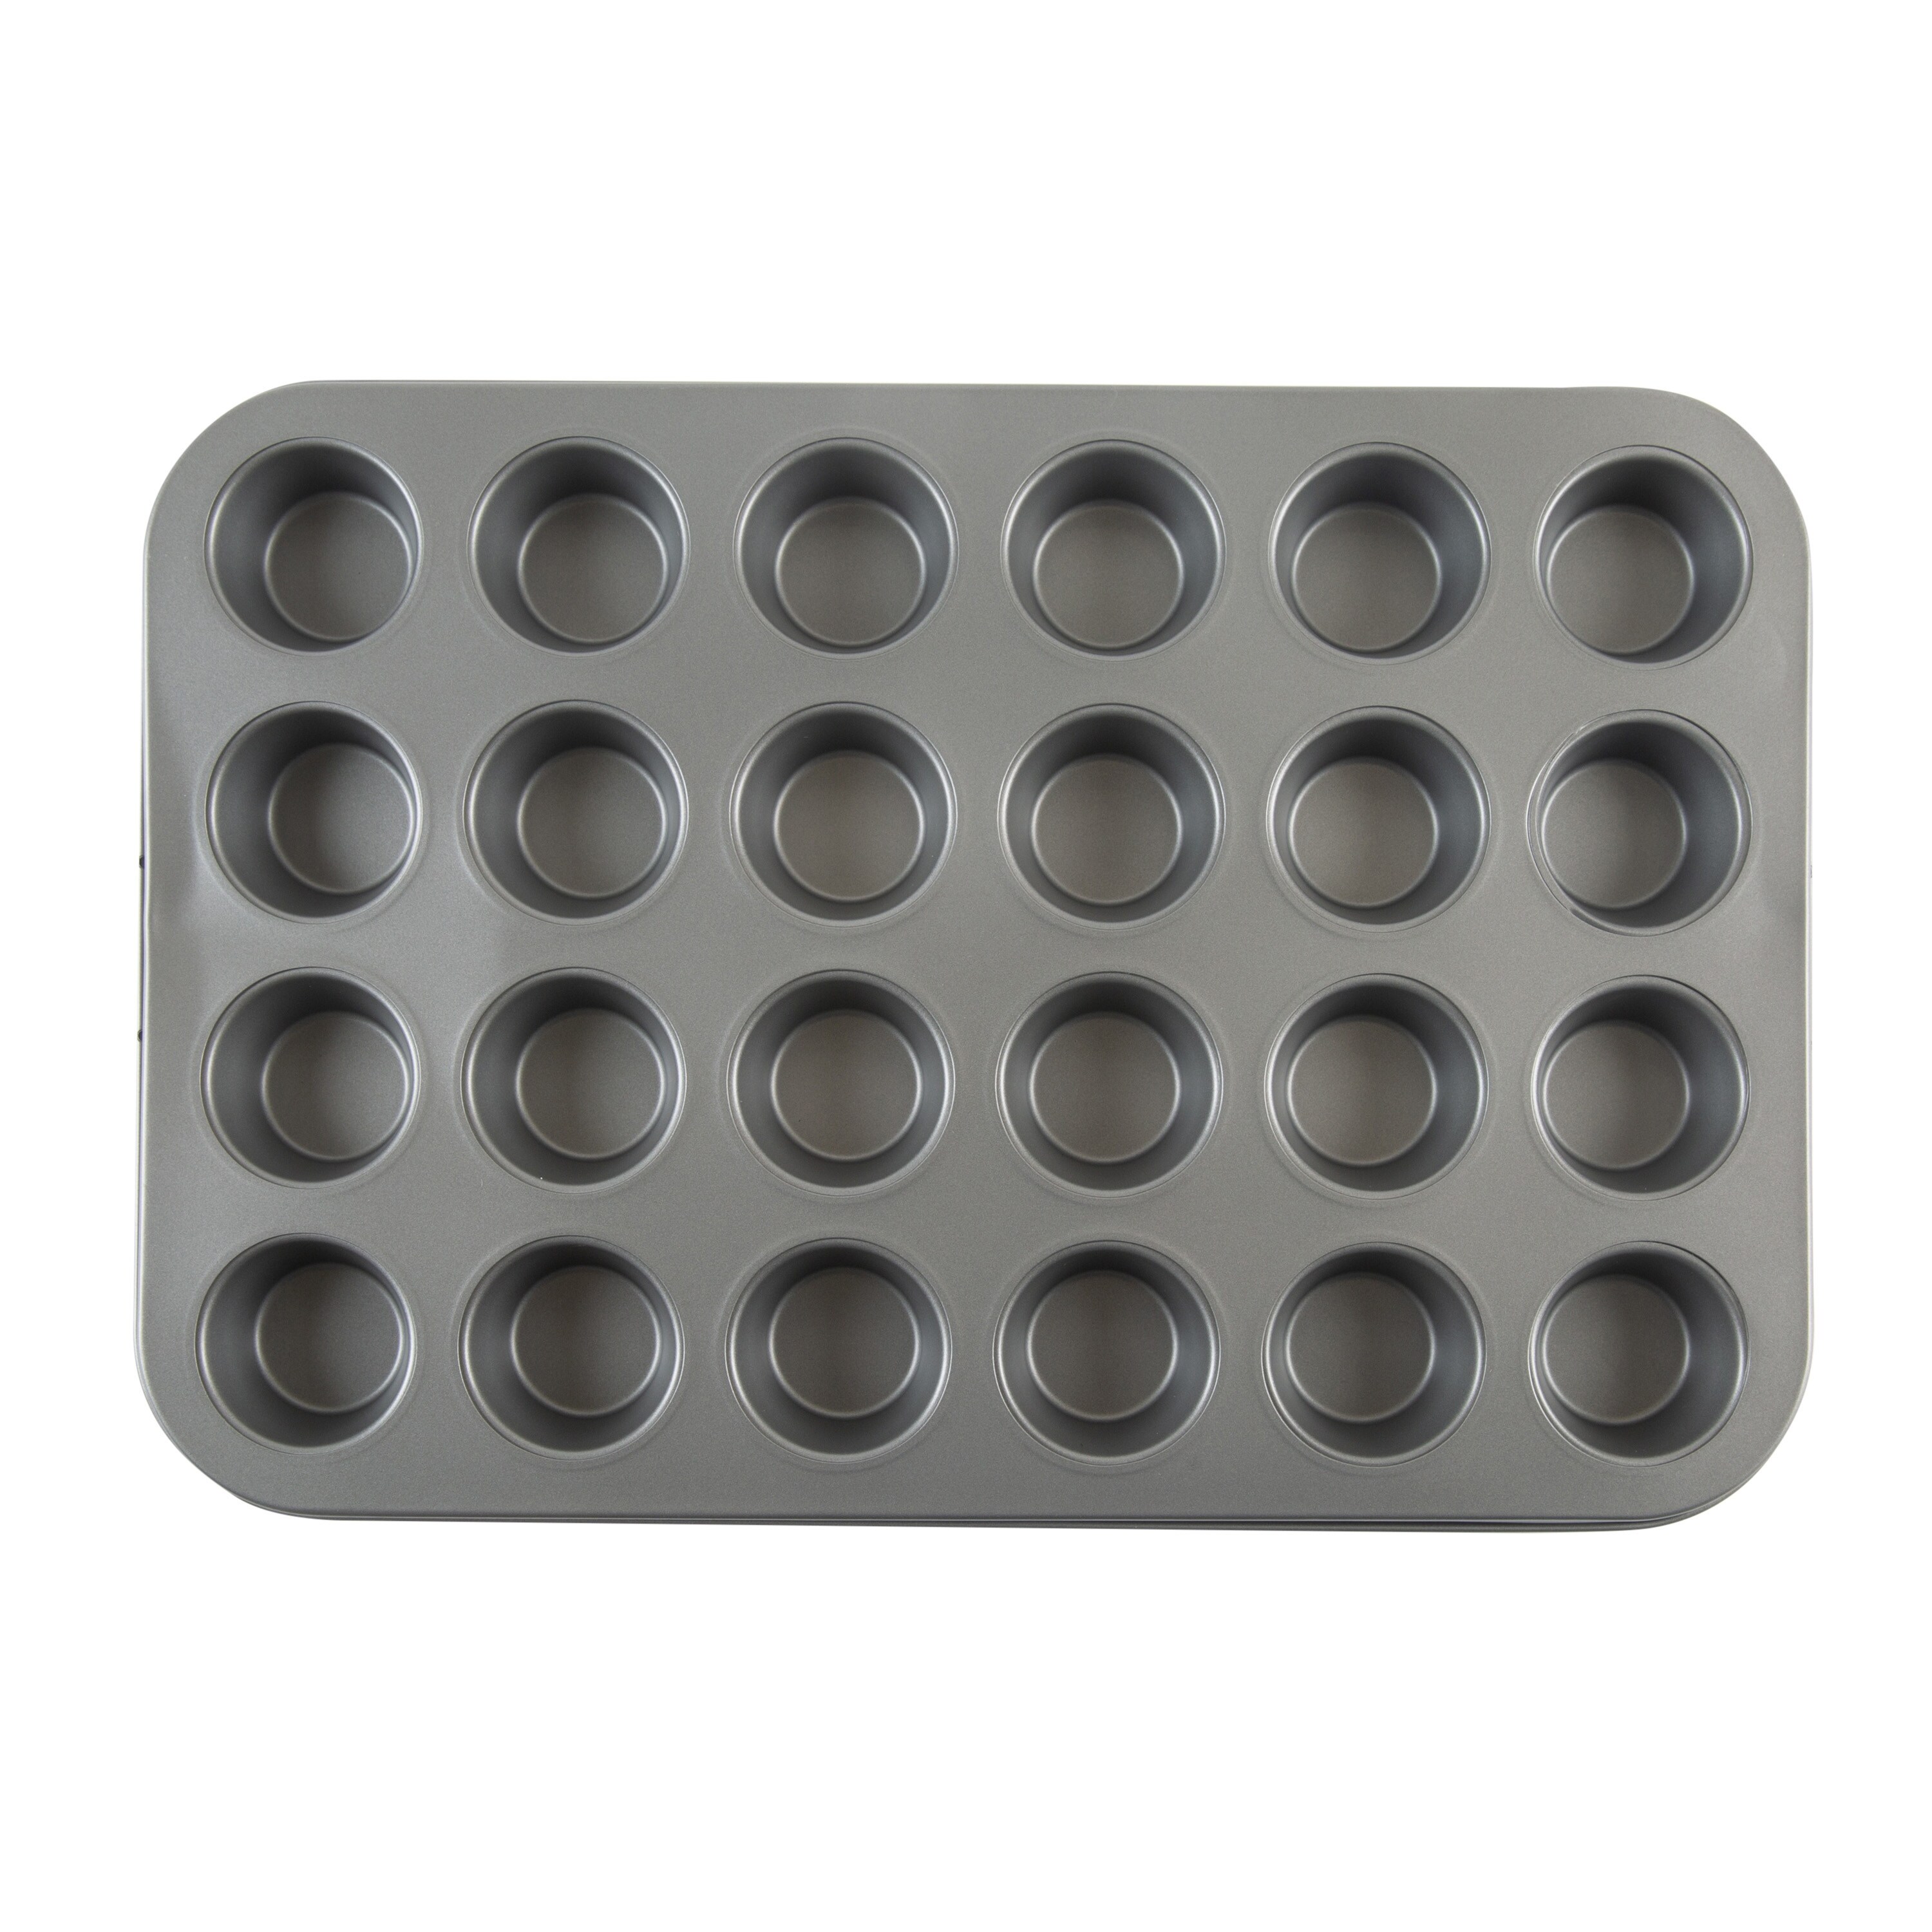 https://ak1.ostkcdn.com/images/products/is/images/direct/3806524c771e1cb24747a3805ccf53c666576f92/Kitchen-Details-24-Mini-Cupcake-Pan.jpg